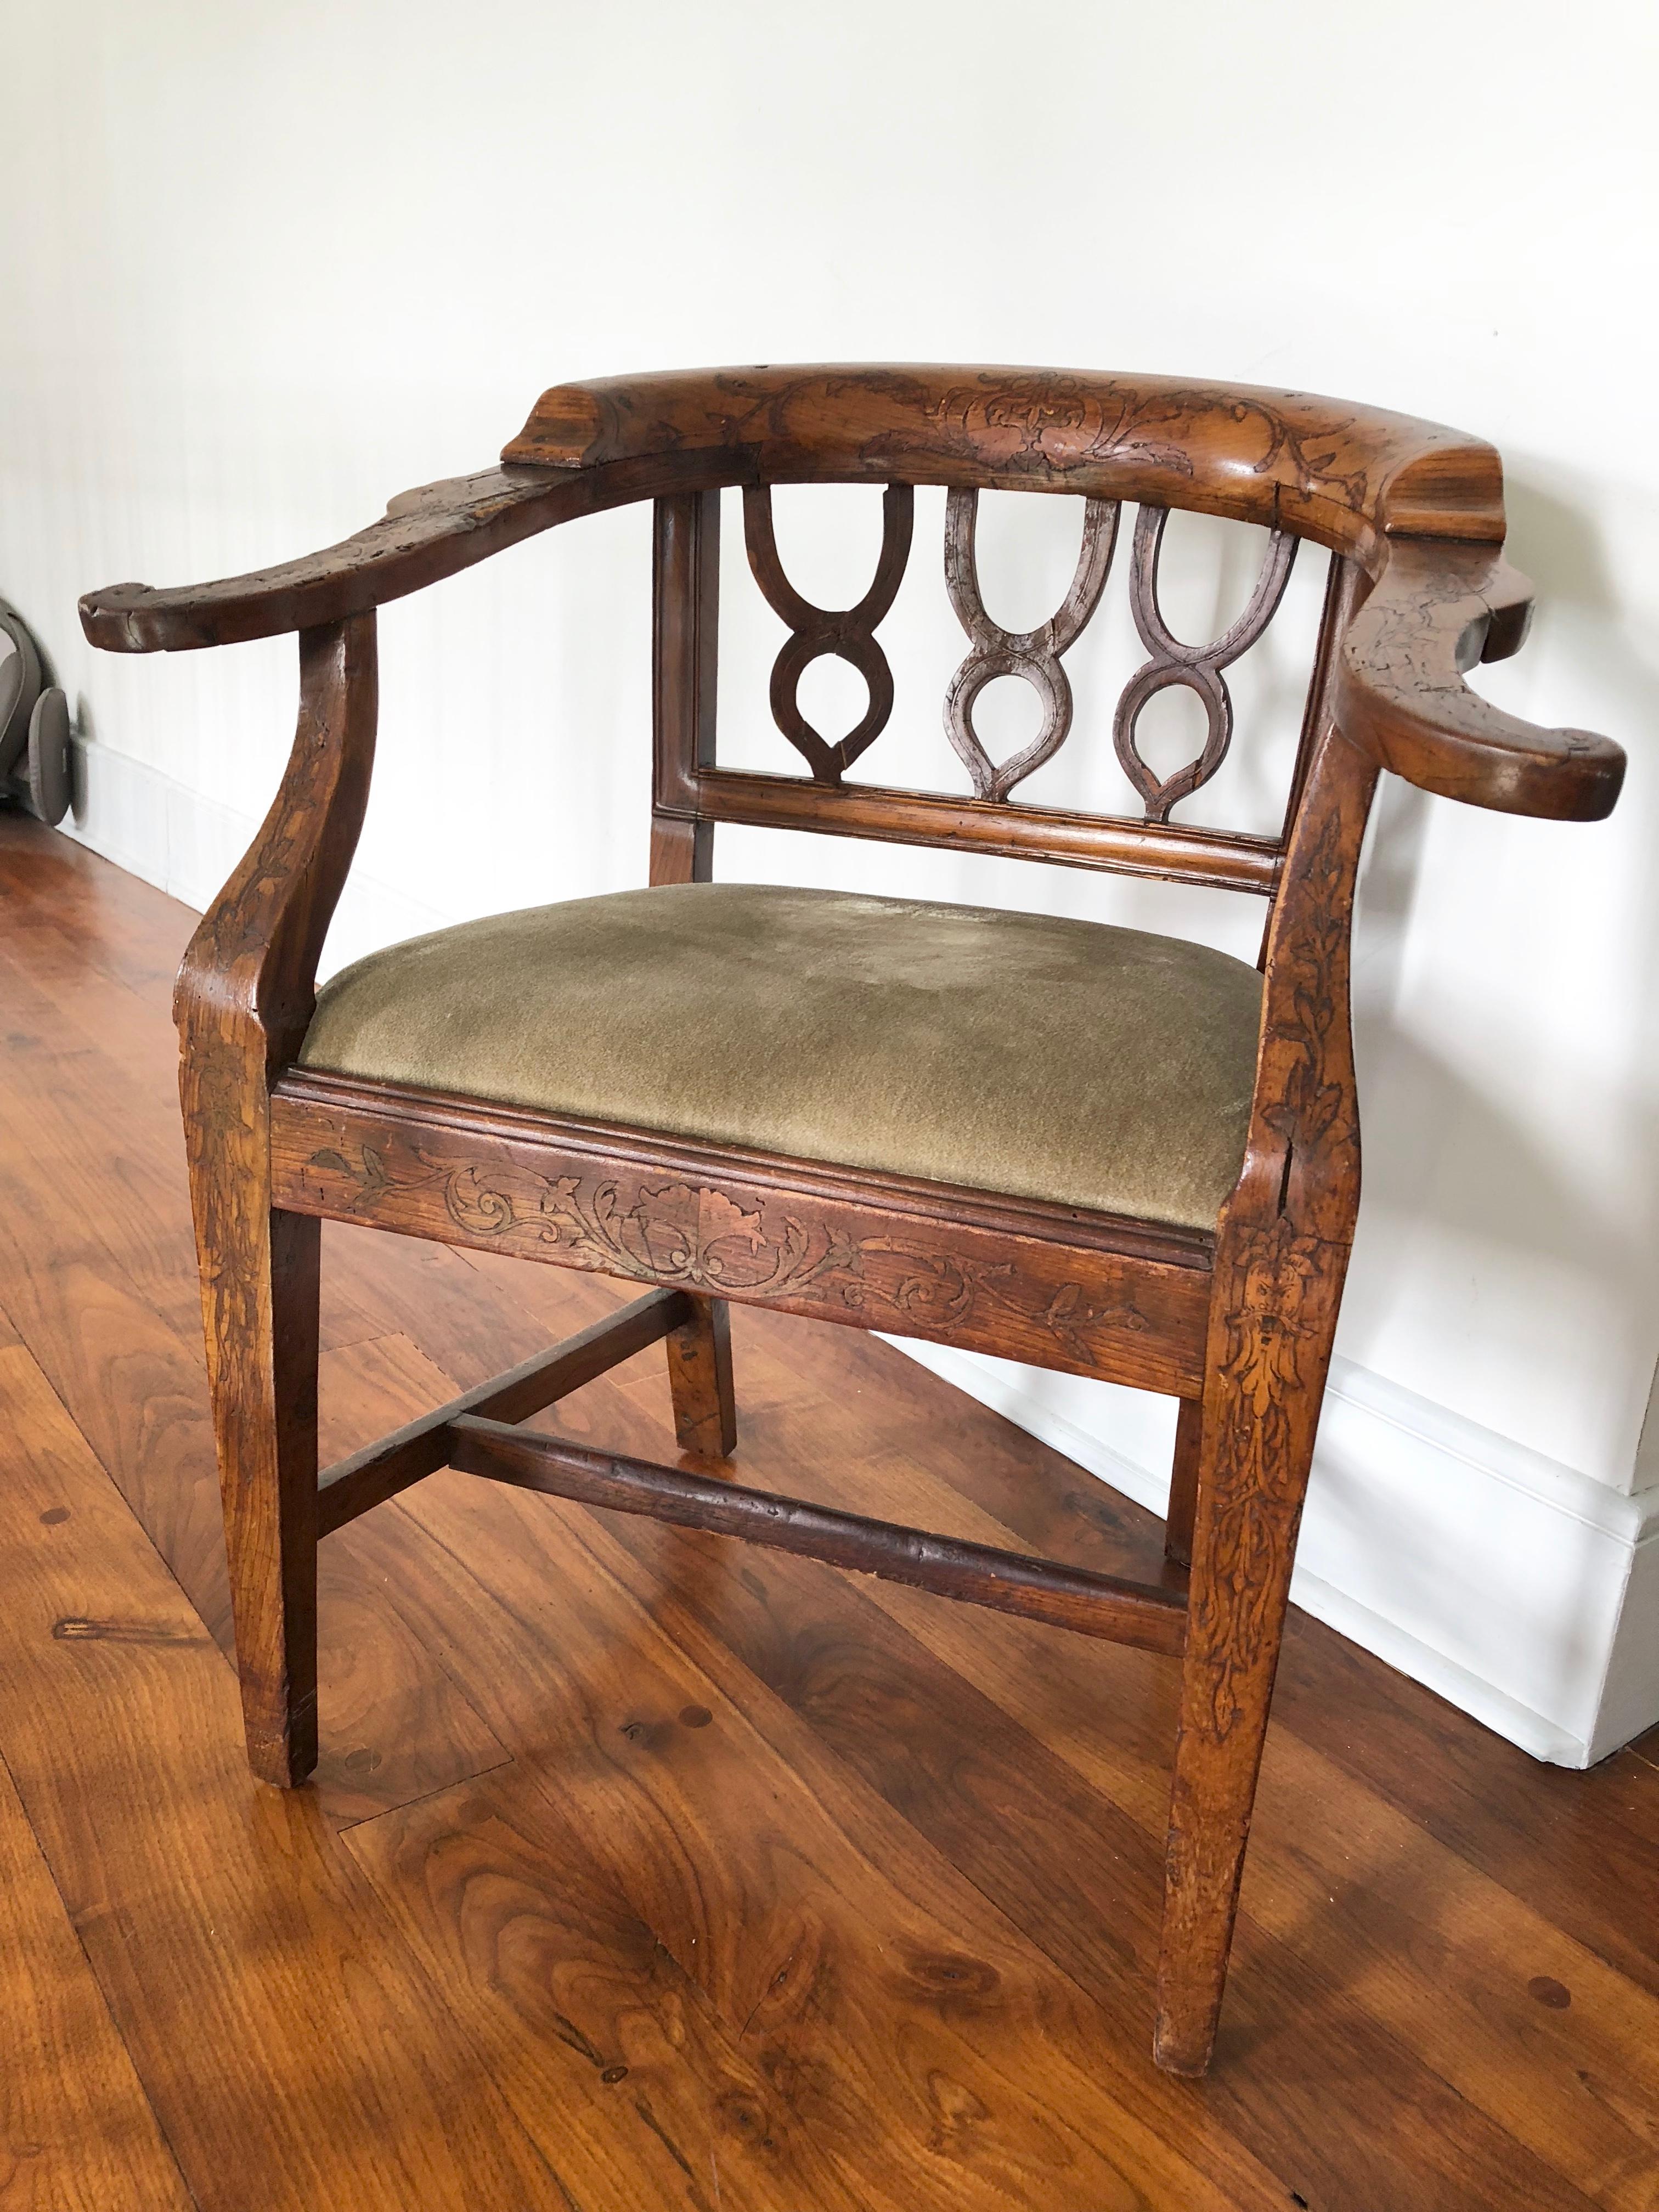 A nice early 19th century yoke-back desk chair with subtle inlay throughout, with an upholstered seat covered in tan velvet, French, circa 1850.